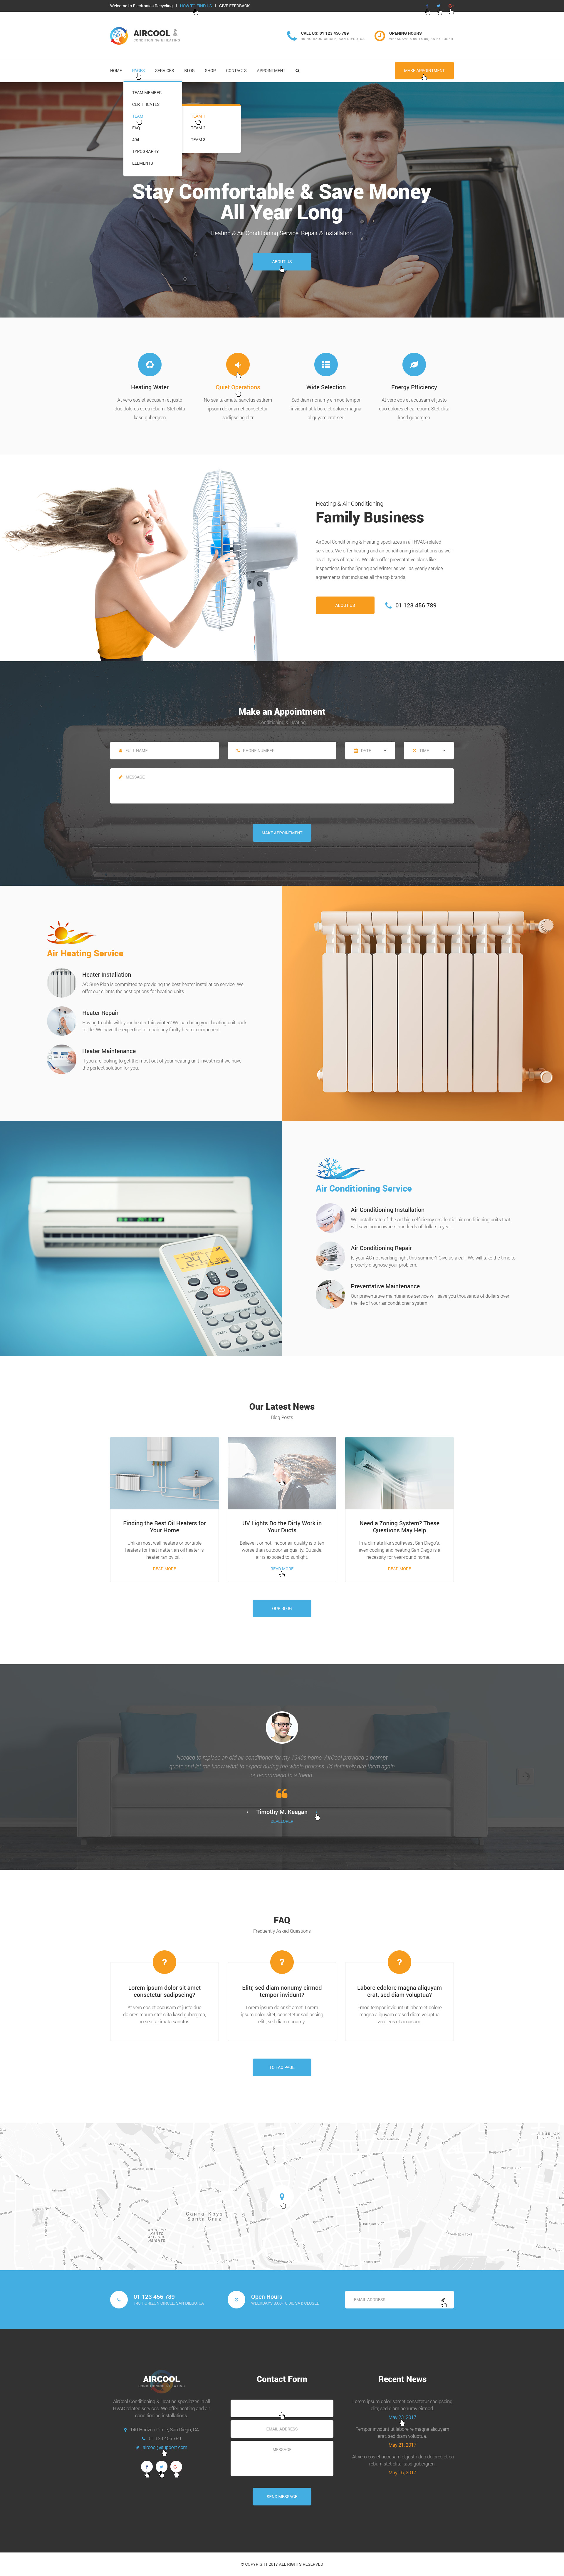 AirCool - Conditioning And Heating PSD Template